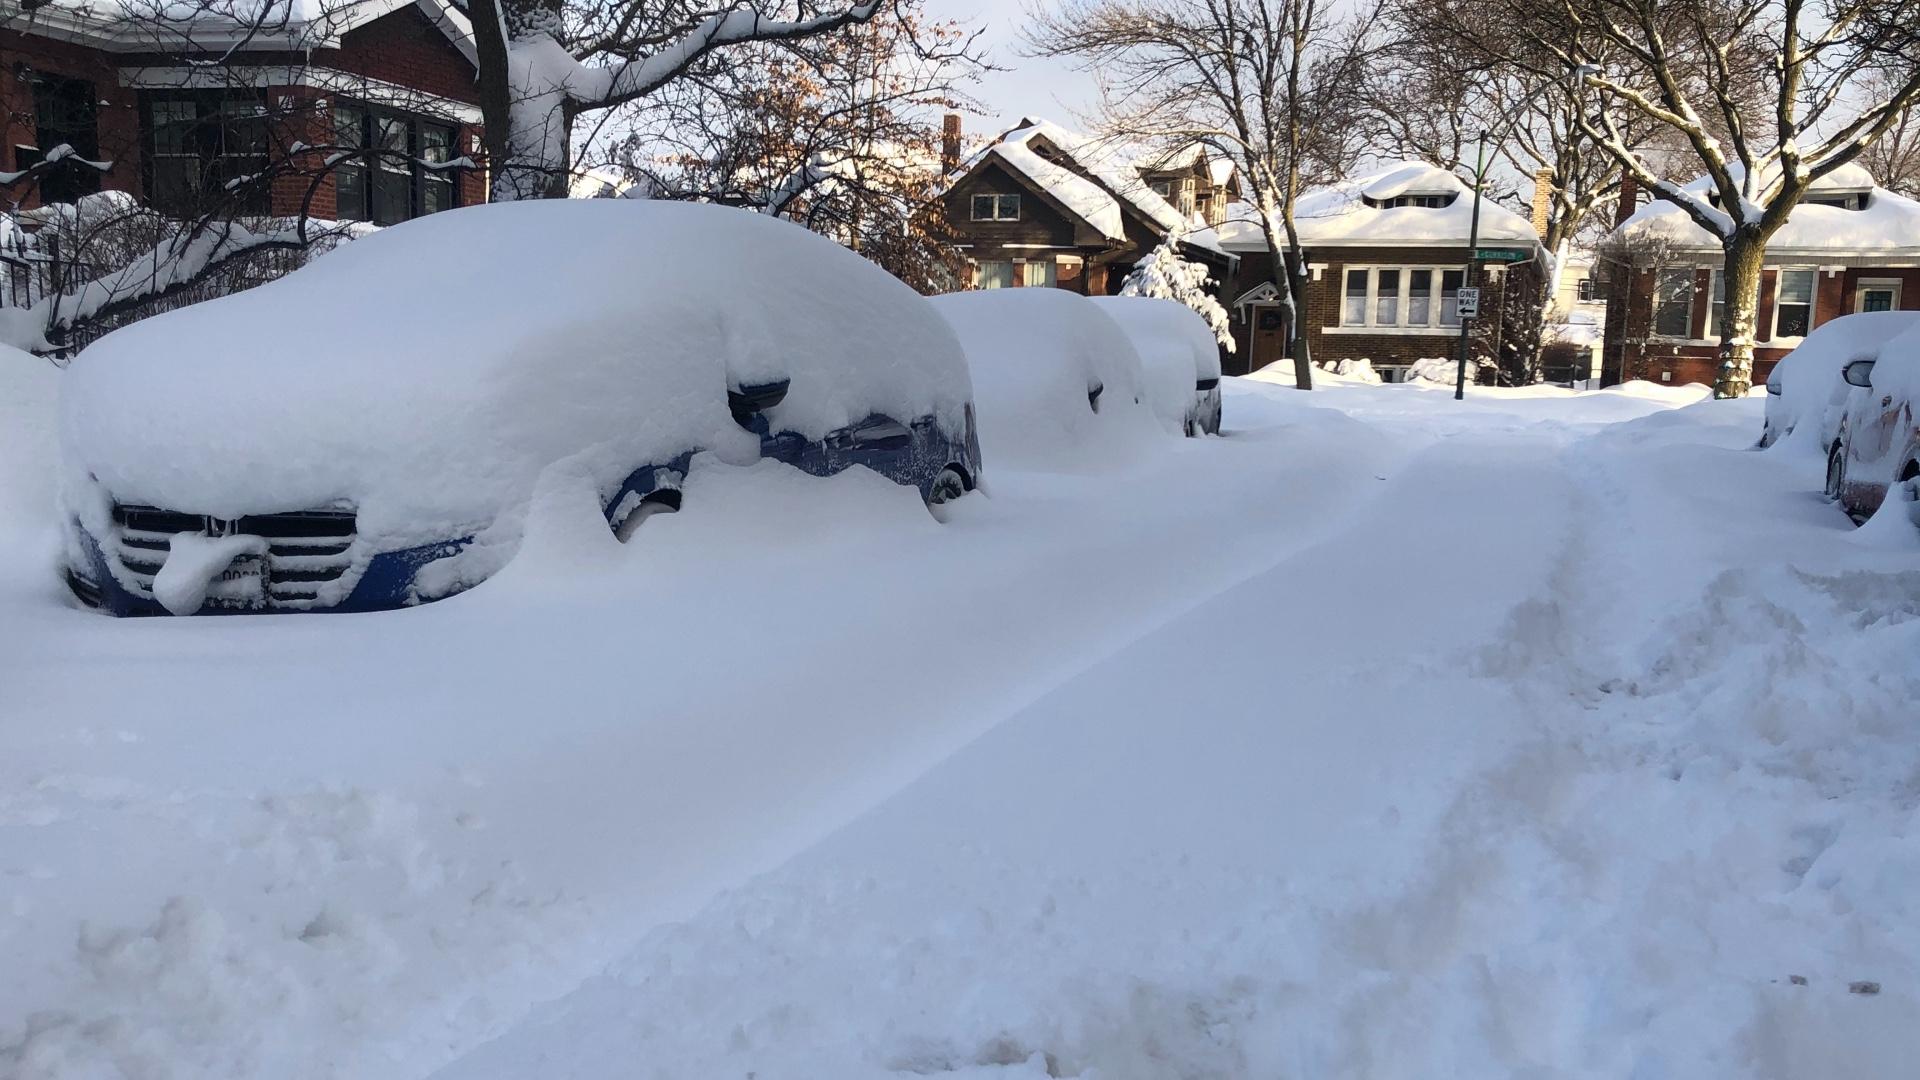 Another major snowfall blanketed Chicago Feb. 15, 2021. (Patty Wetli / WTTW News)